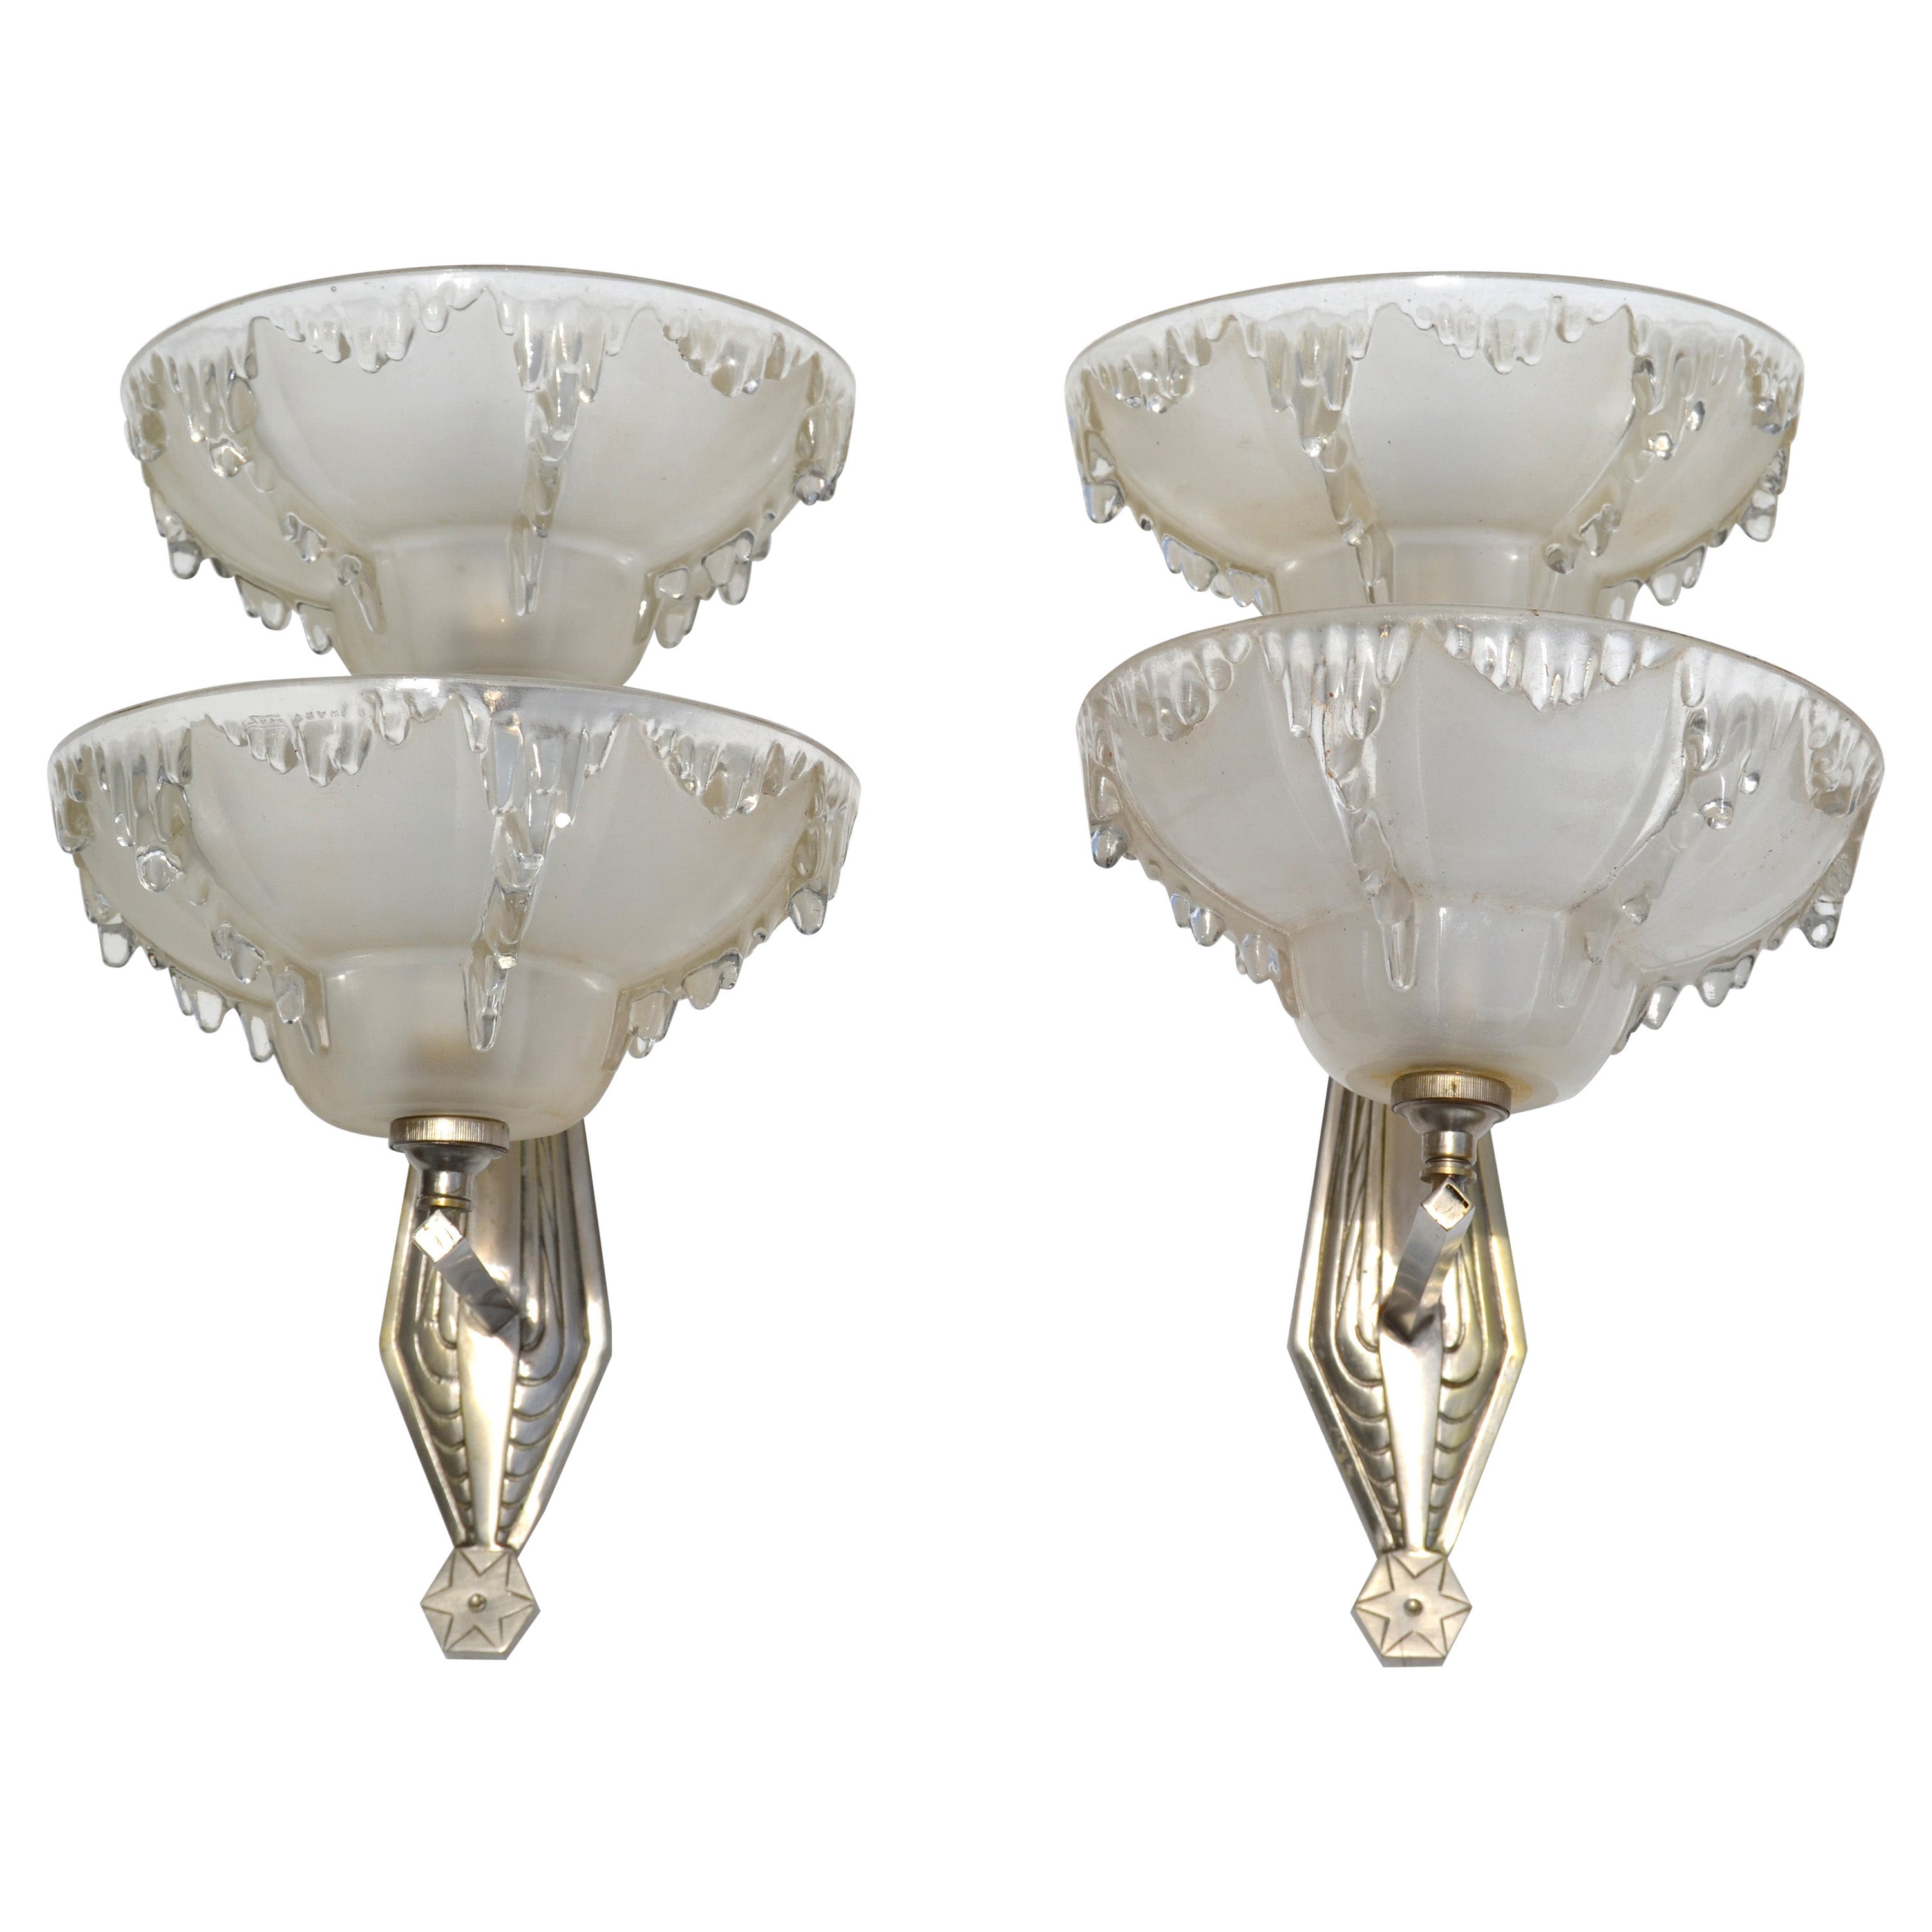 Art Deco Blown Murano Glass & Steel Wall Sconces France Mid-Century Modern, Pair For Sale